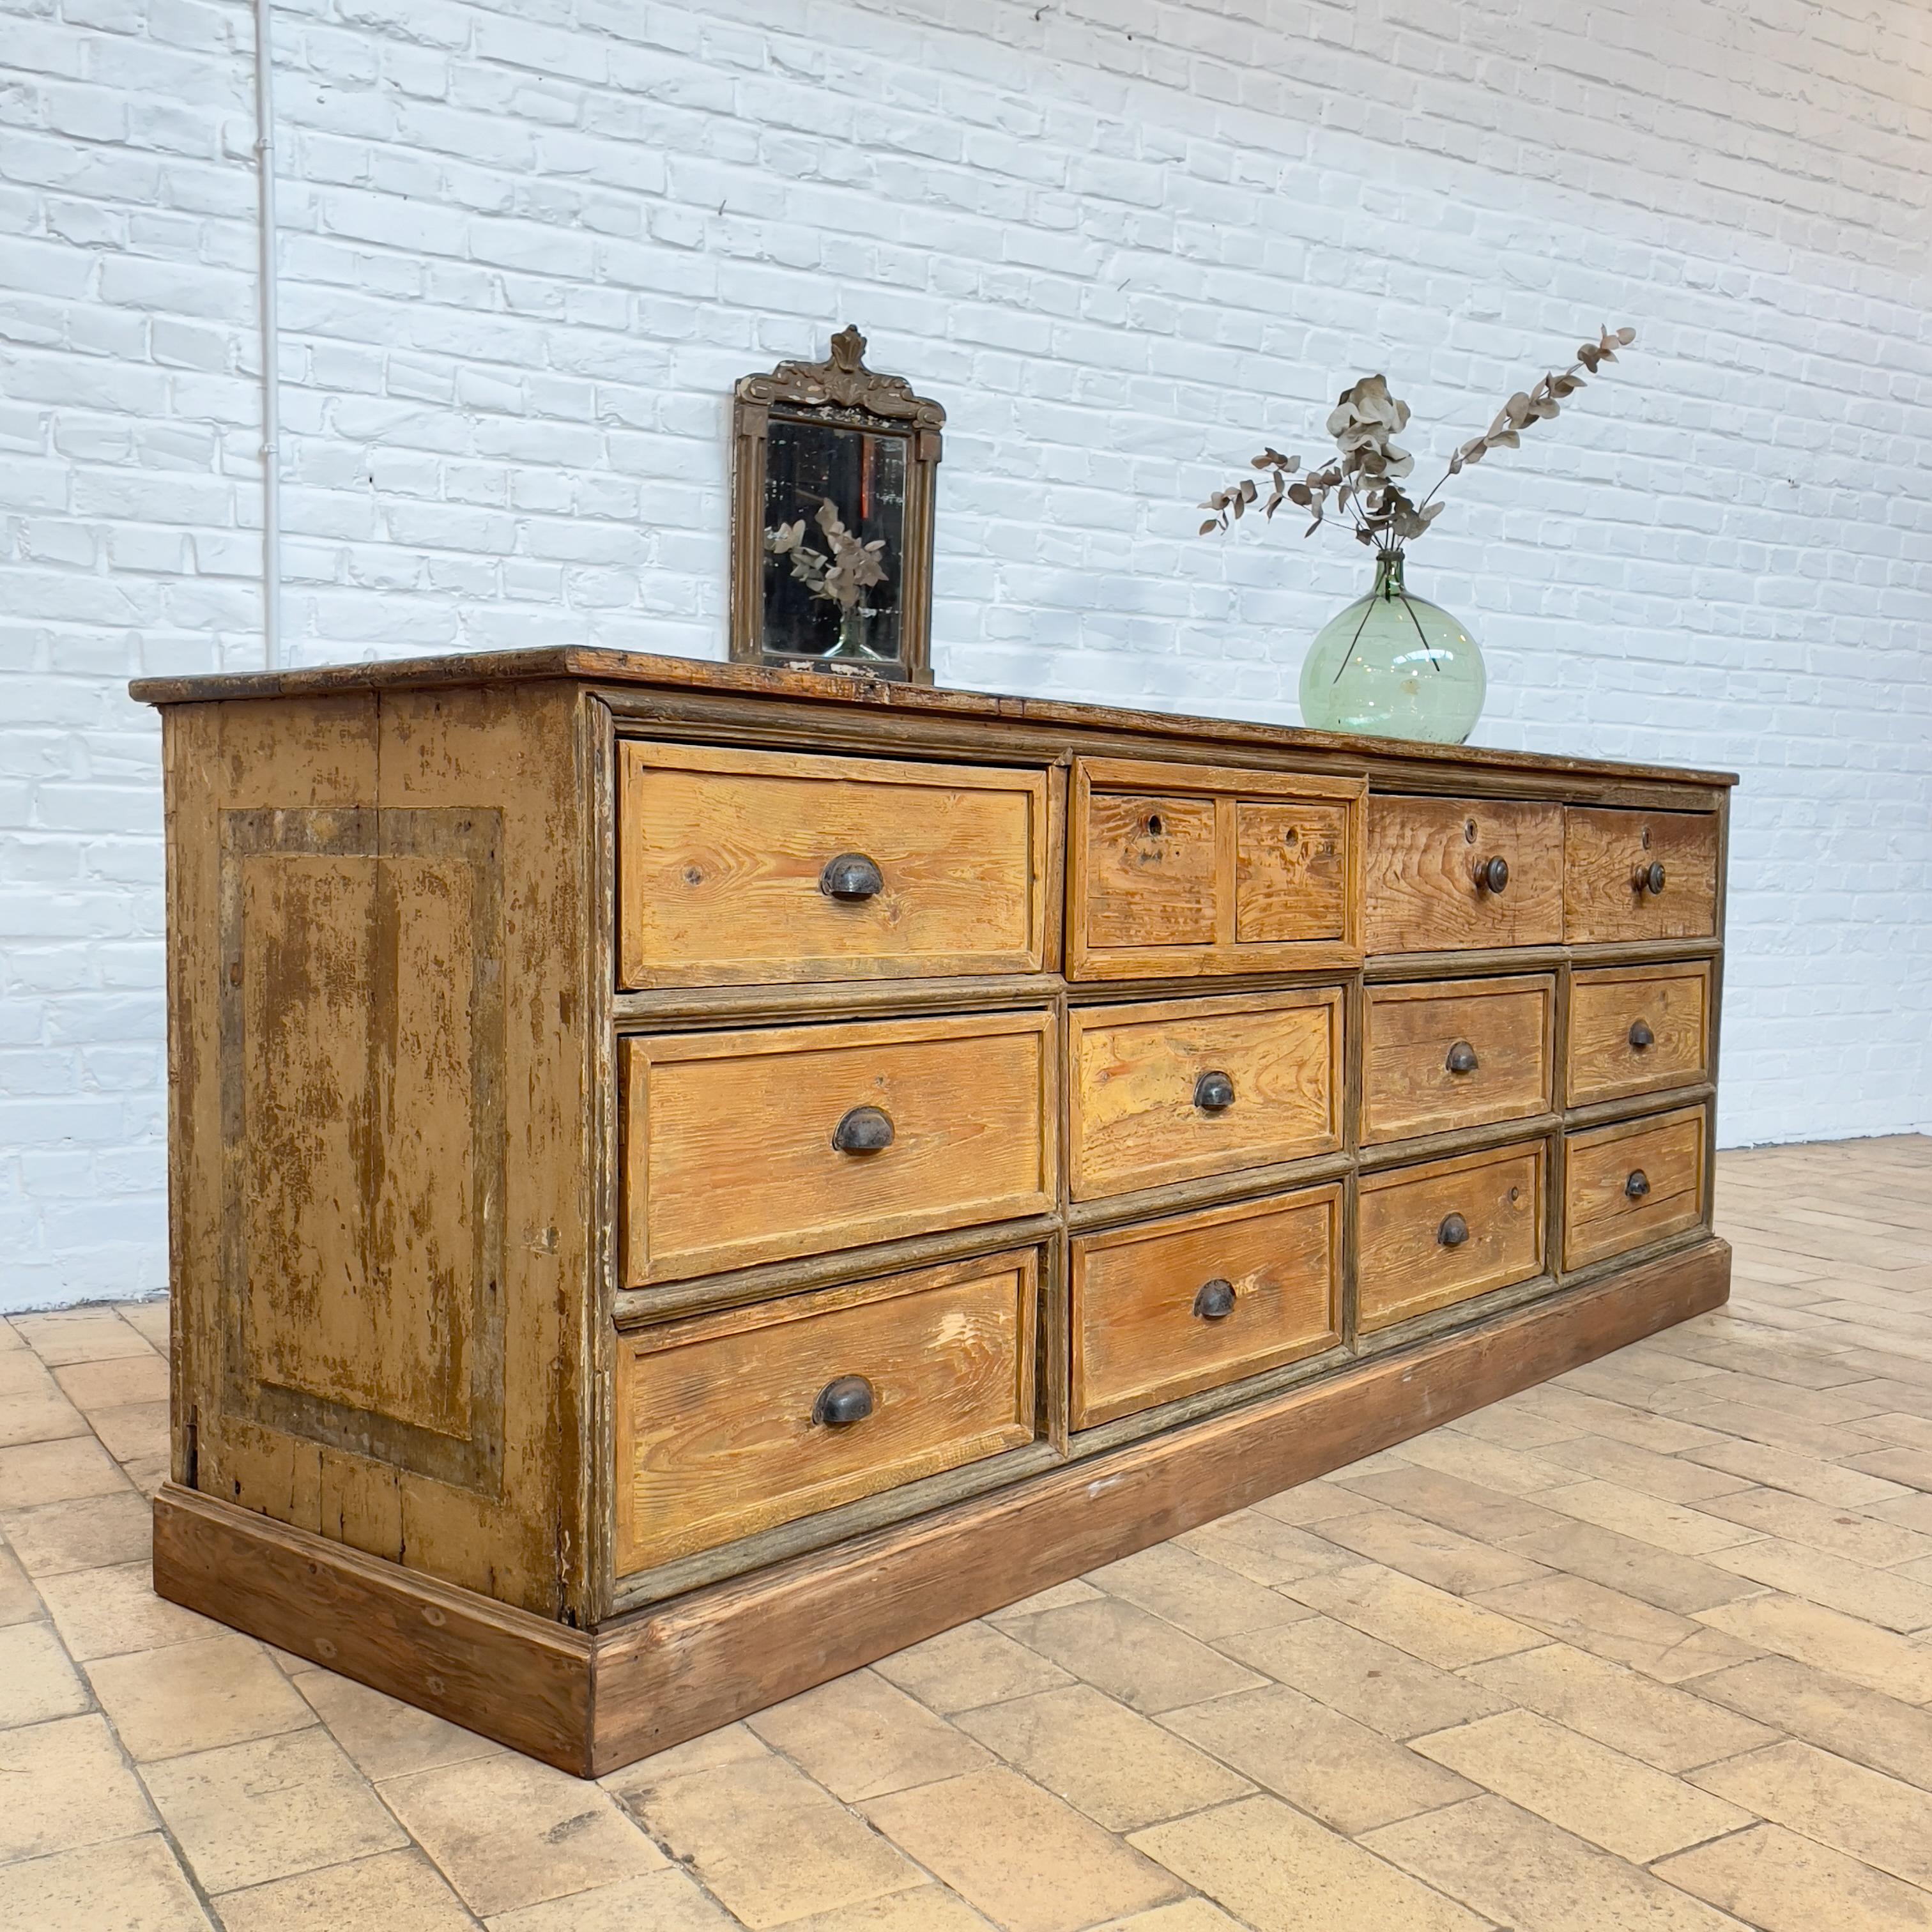 Other Early 20th Century French Haberdashery Cabinet with Drawers